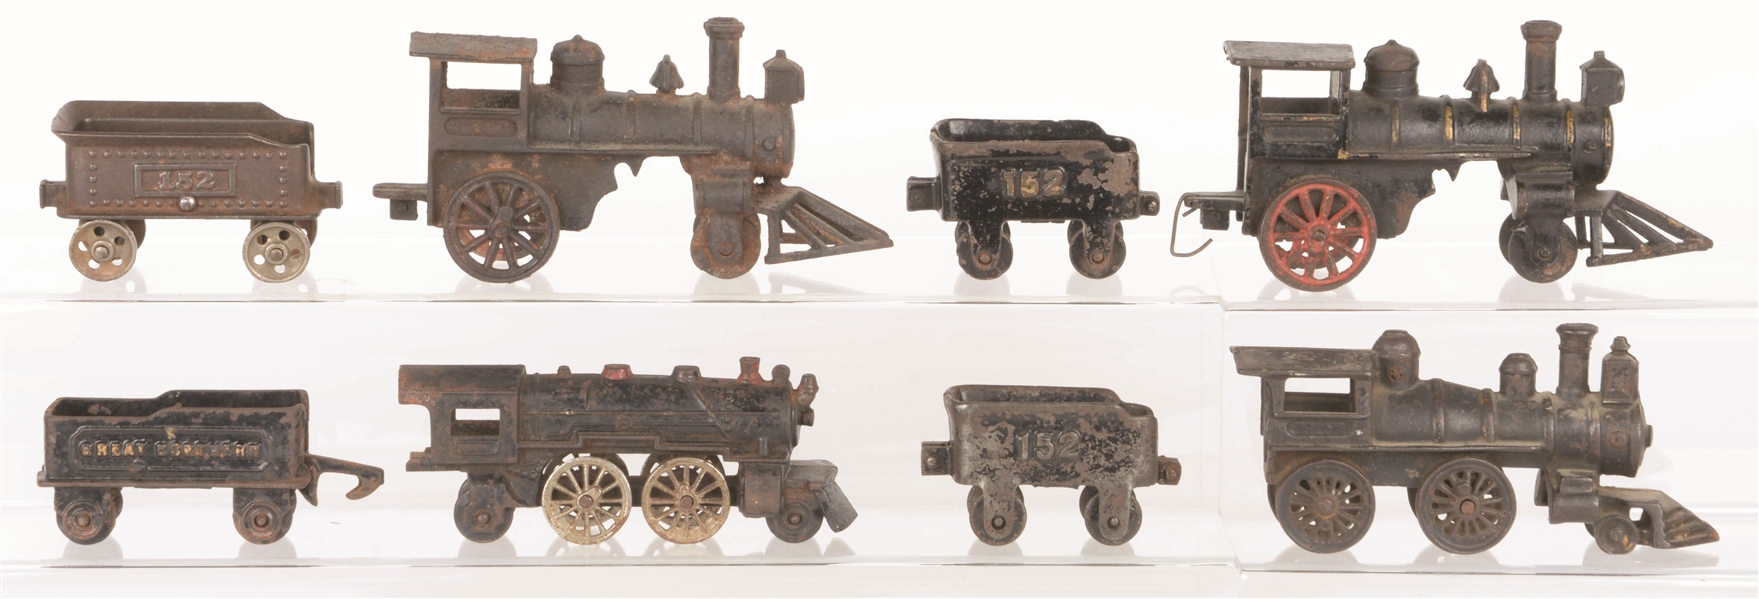 LOT OF 8: CAST-IRON FLOOR TOY STEAM LOCOMOTIVES & NOT NECESSARILY MATCHING TENDERS.